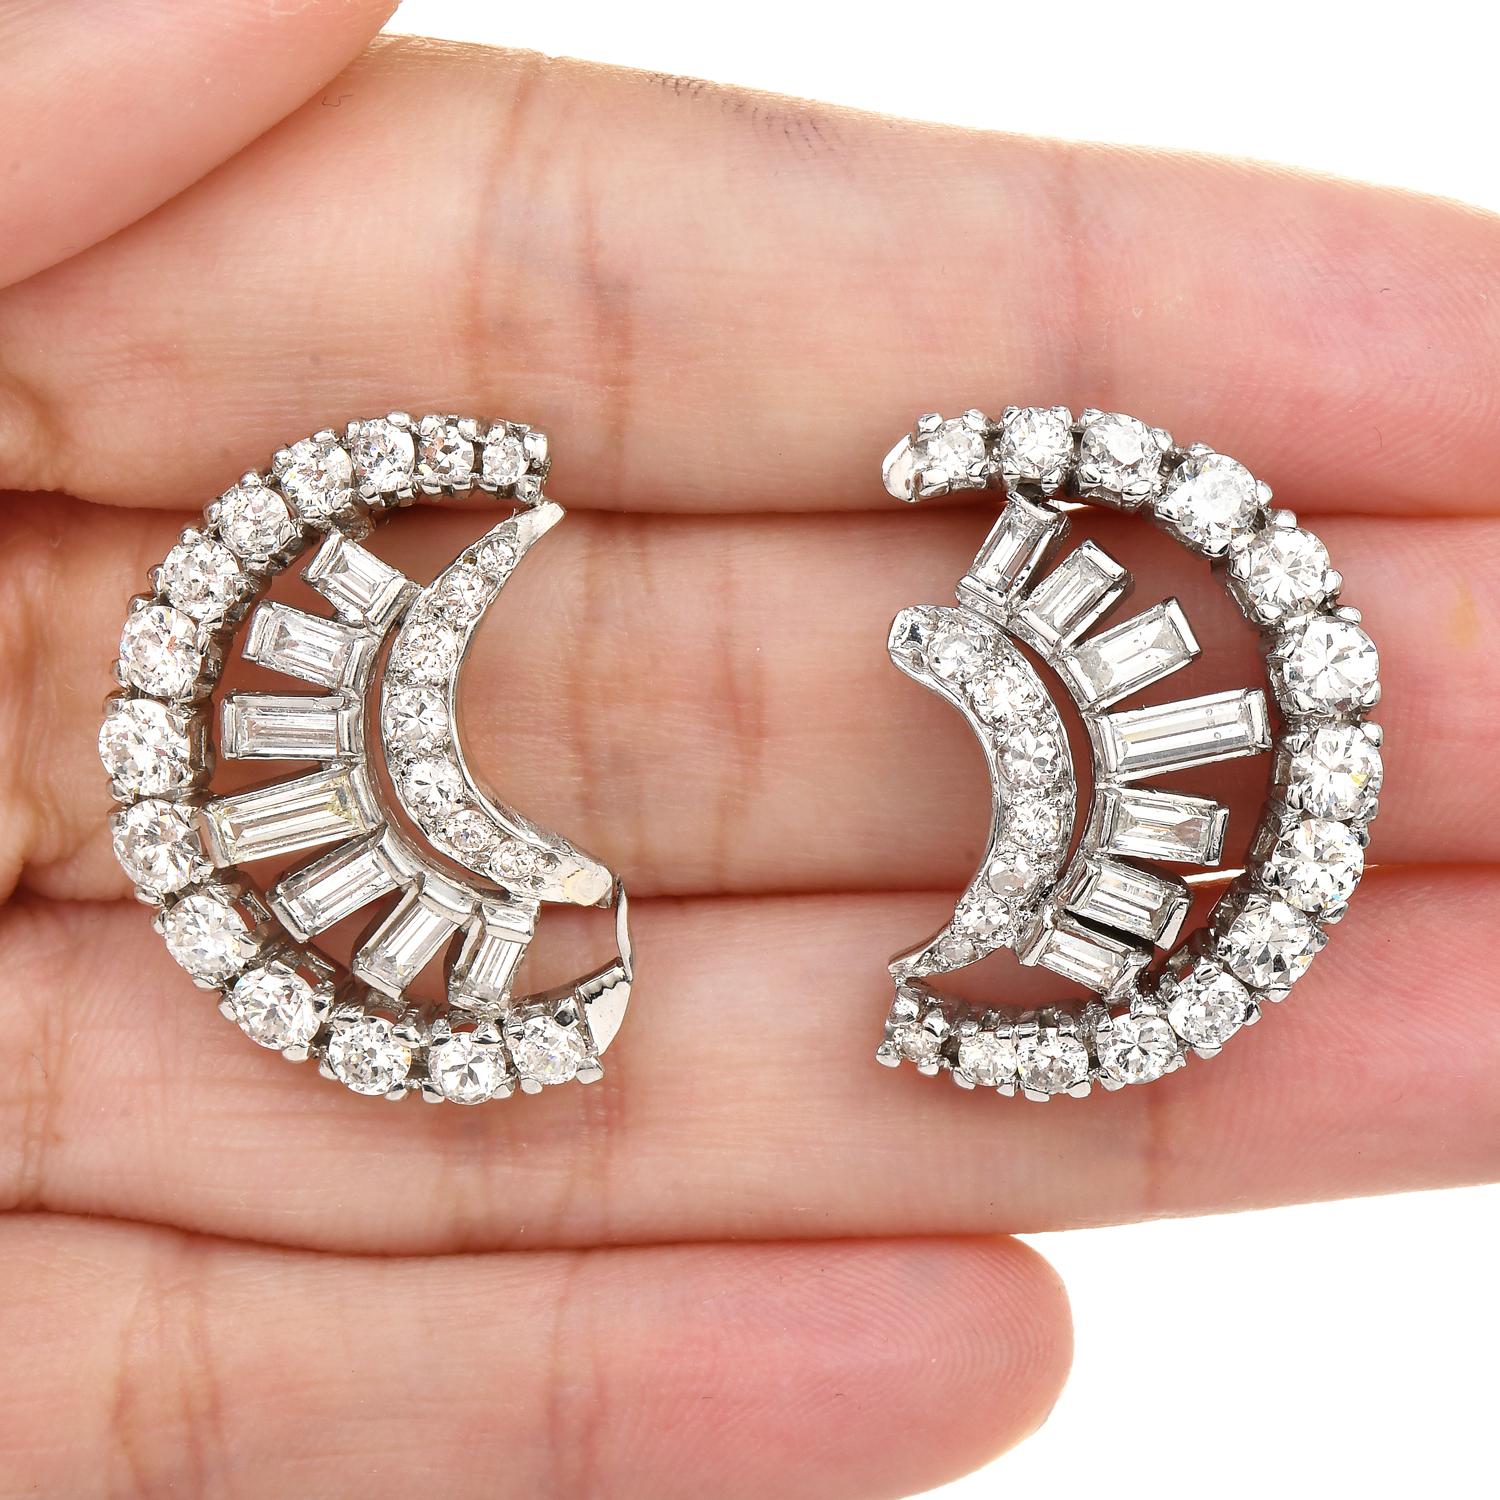 5.40cts Diamond Platinum Round Baguette Diamond Crescent Earrings In Excellent Condition For Sale In Miami, FL